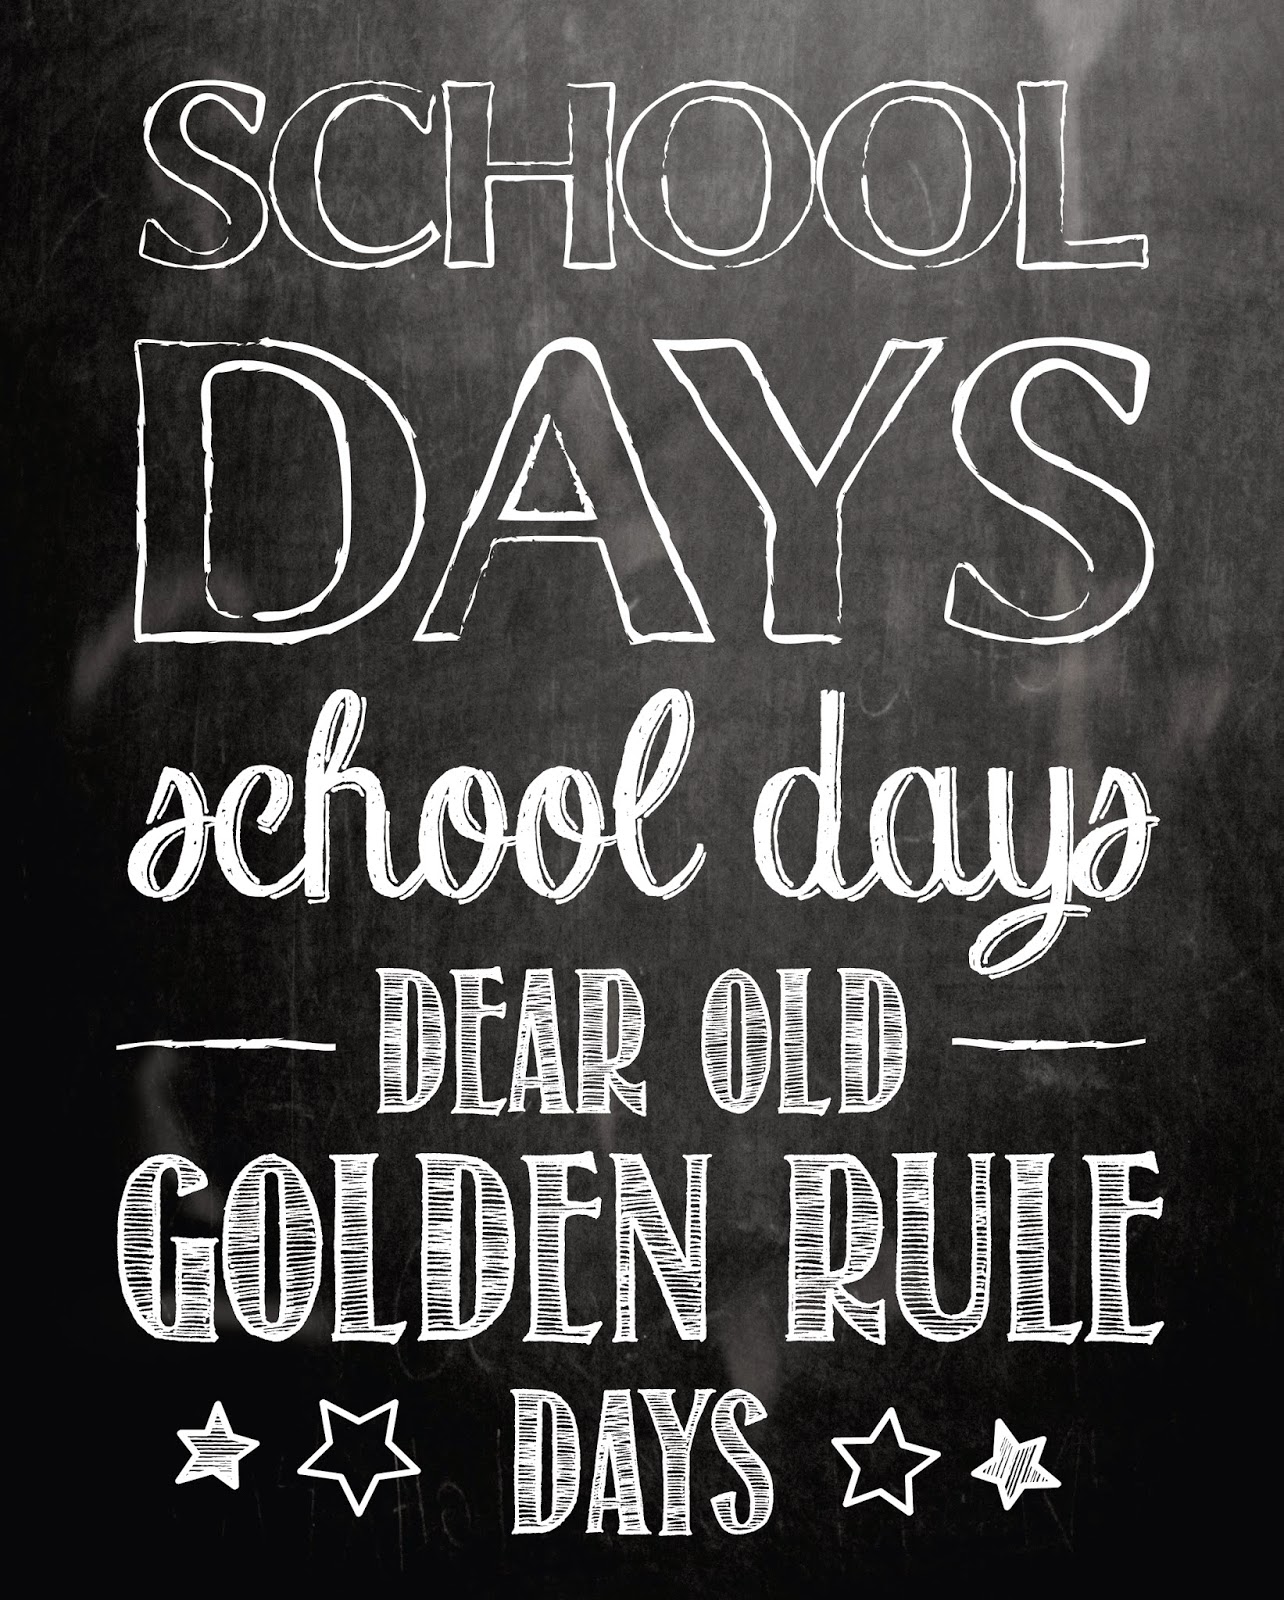 School Days Chalkboard Printable from Denise on a Whim